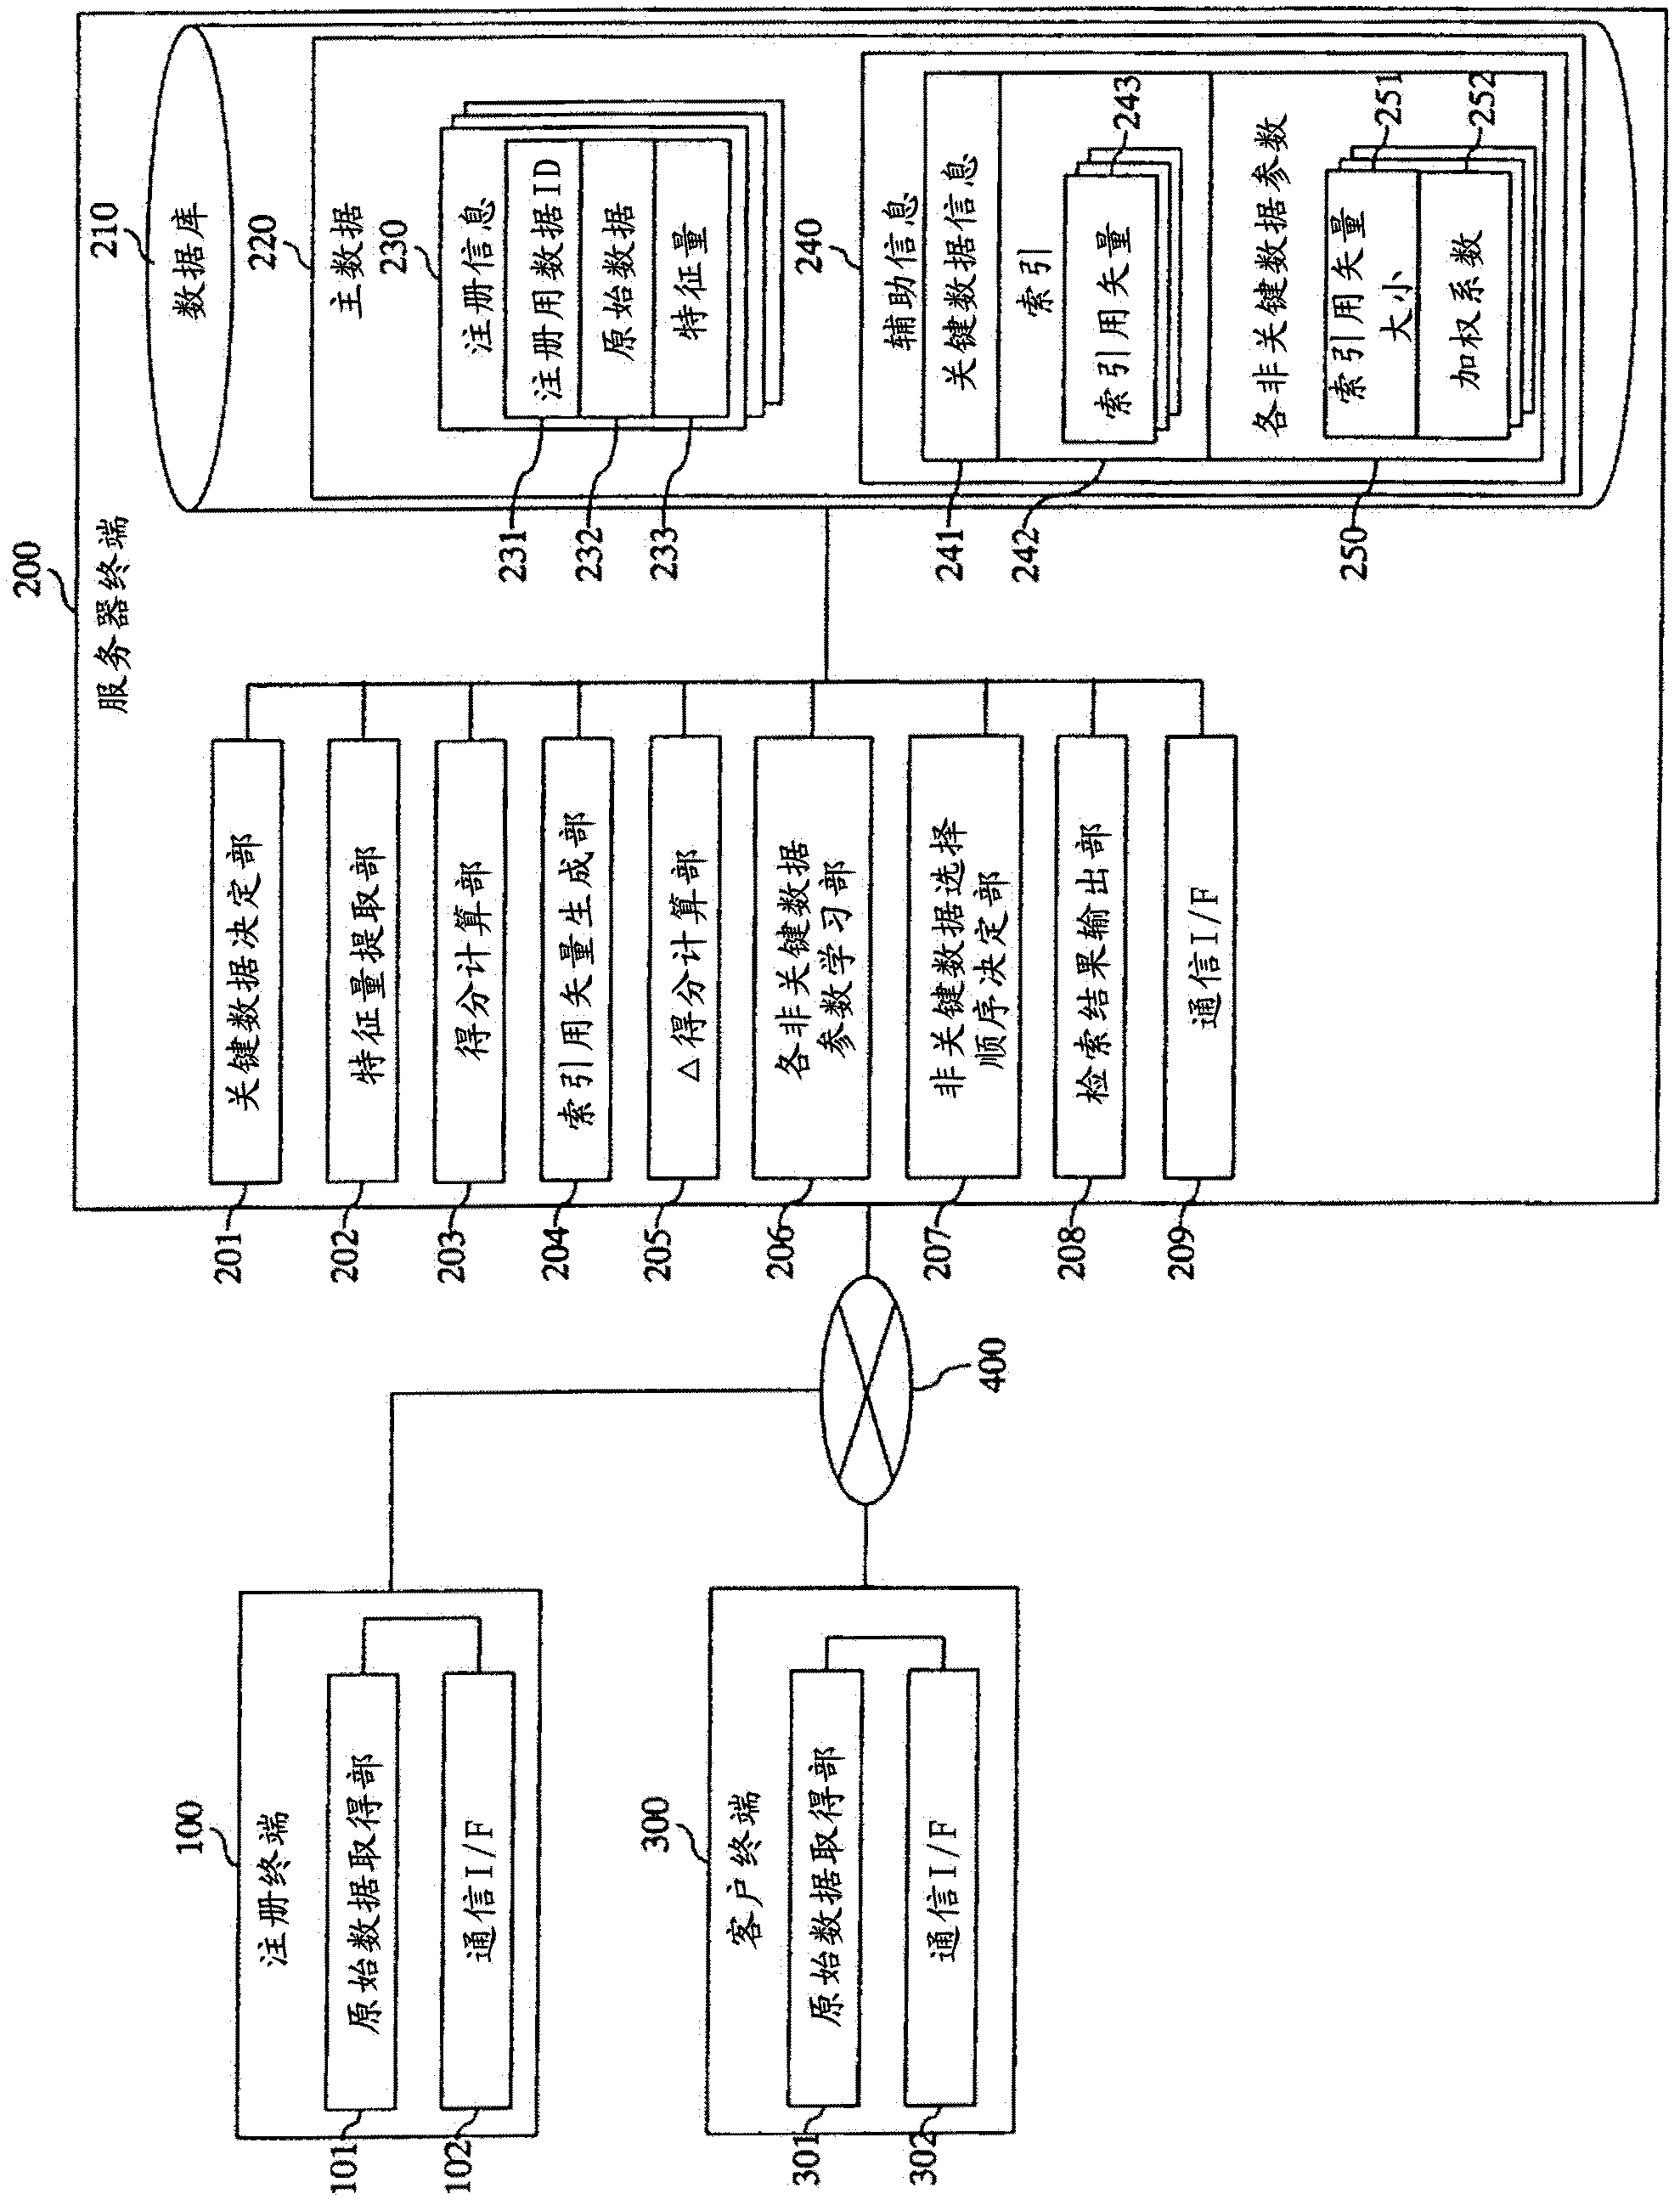 High-accuracy similarity search system